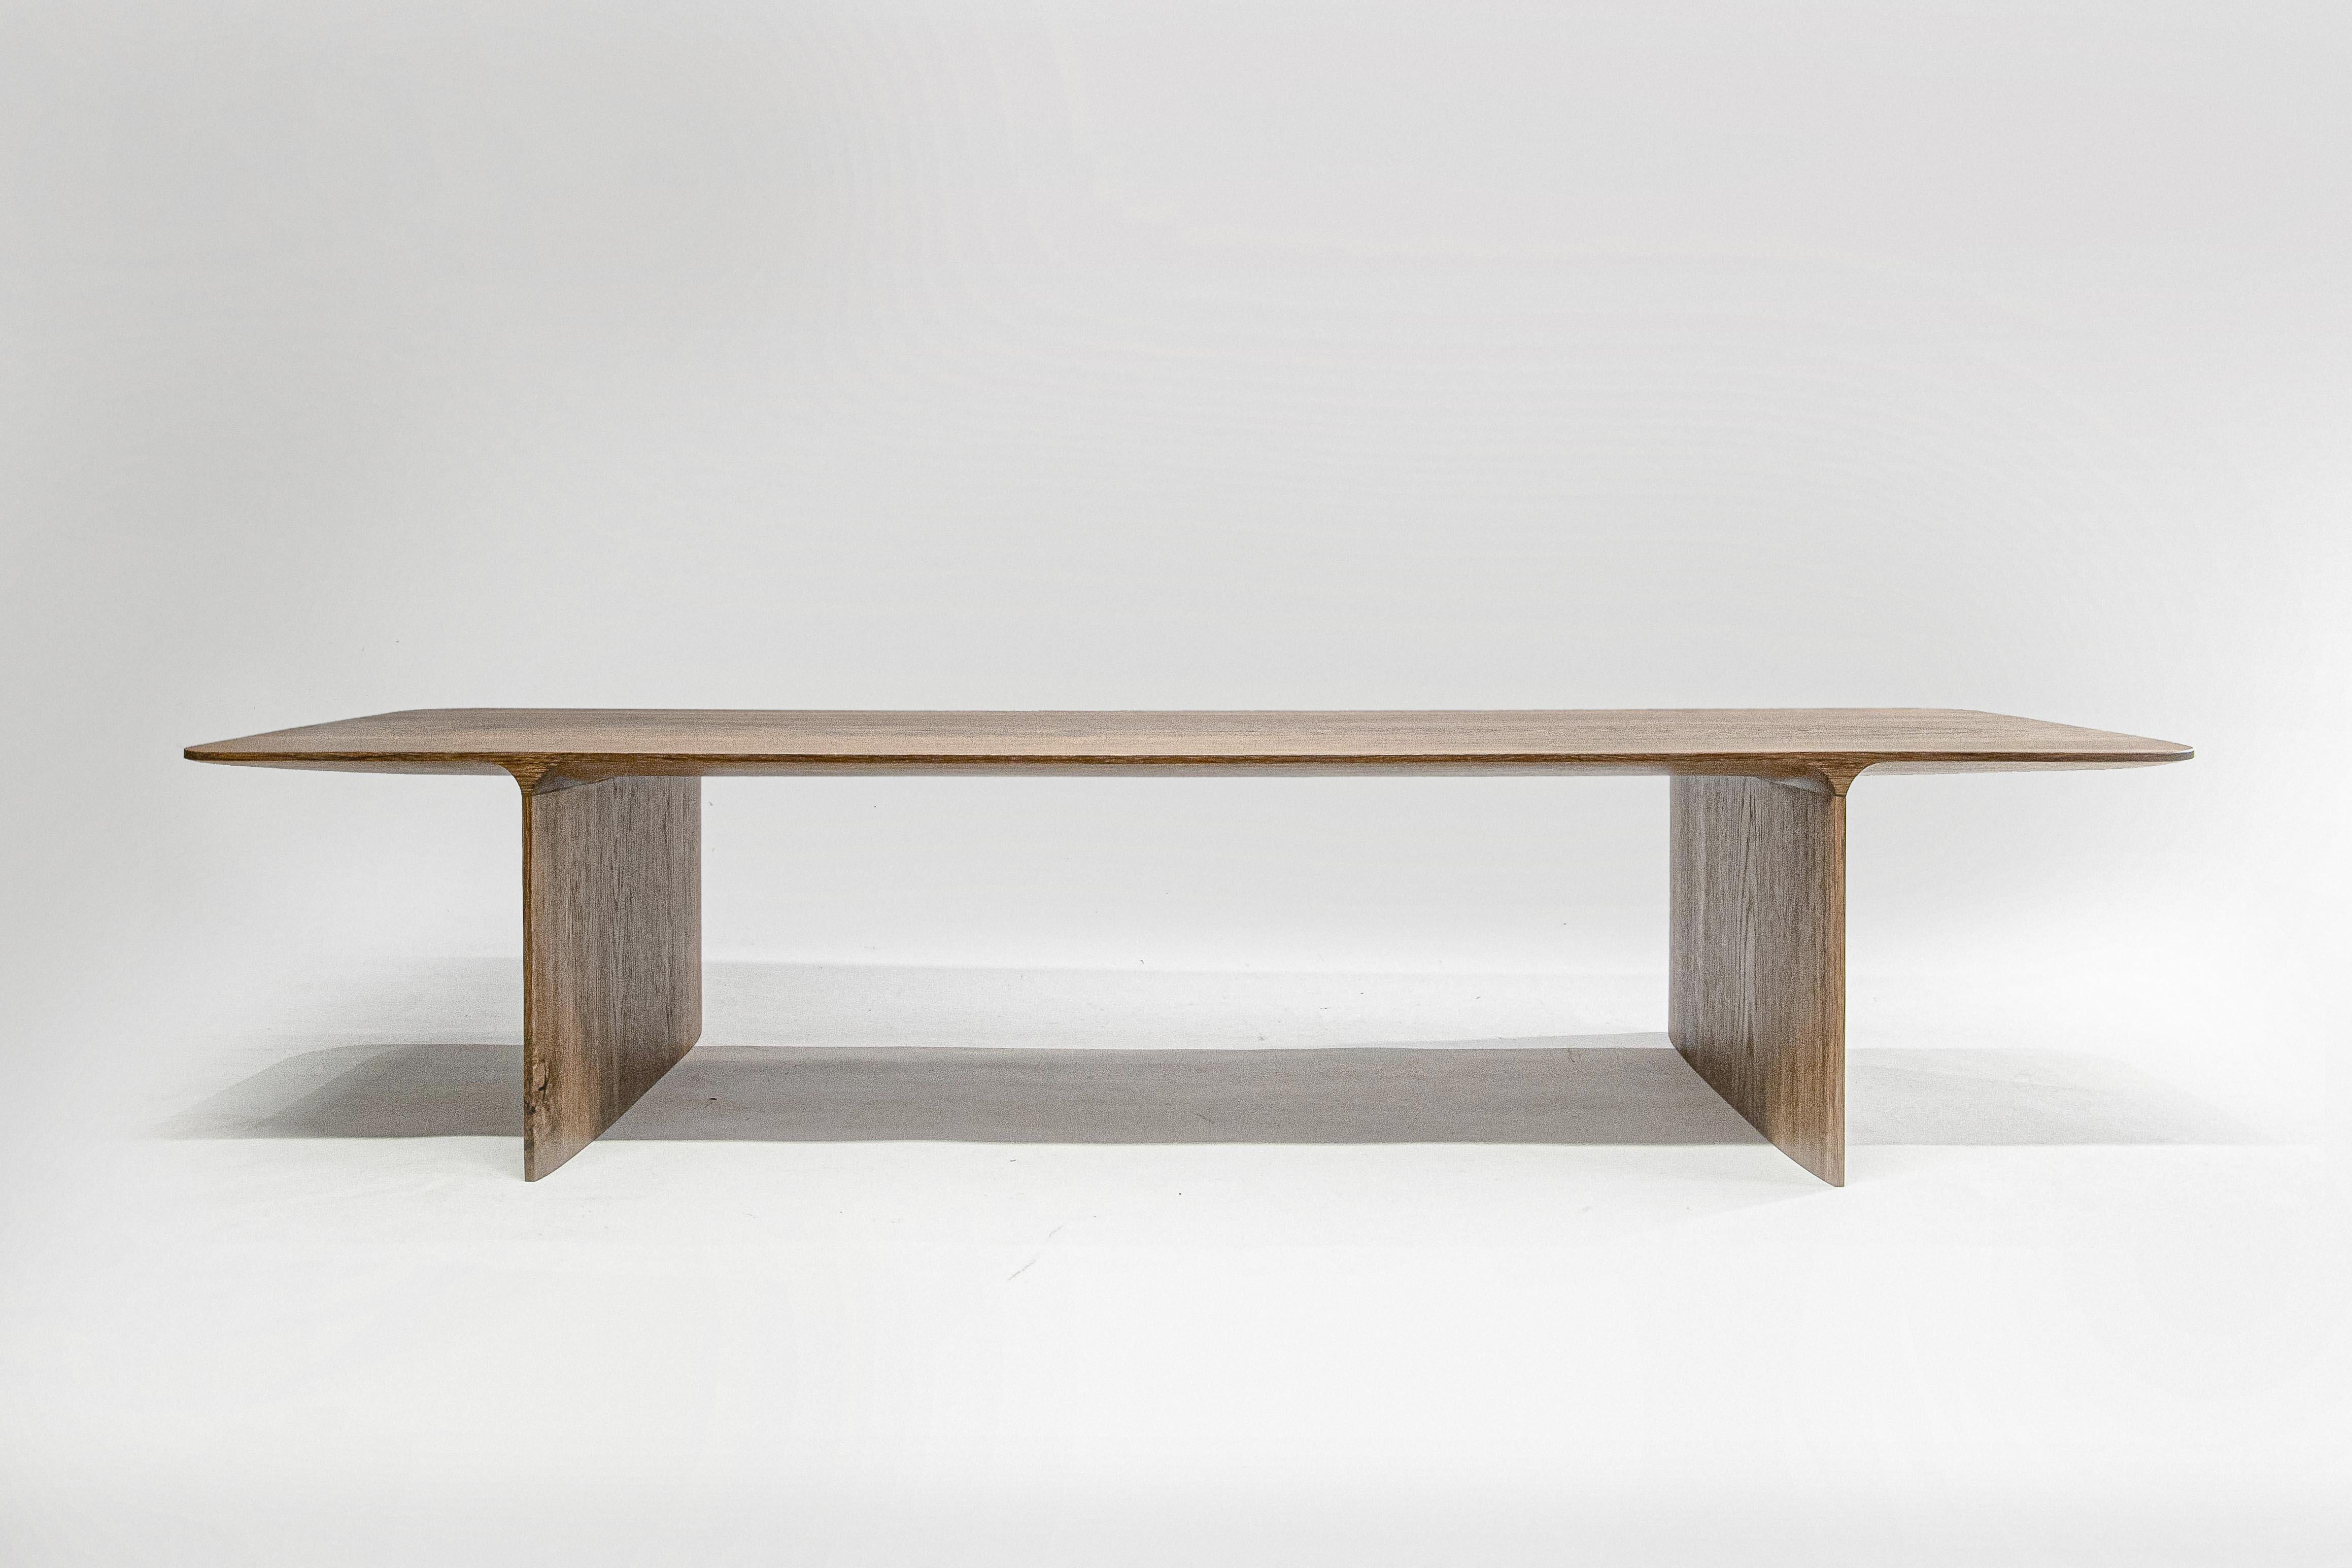 Shave oak and nut fall coffee table by Cedric Breisacher
Dimensions: L 180 x L 60 x H 35 cm
Materials: Oak, nut fall

Designer-sculptor, Cedric Breisacher has an atypical path. Self-taught man, he followed during five years an Industrial class